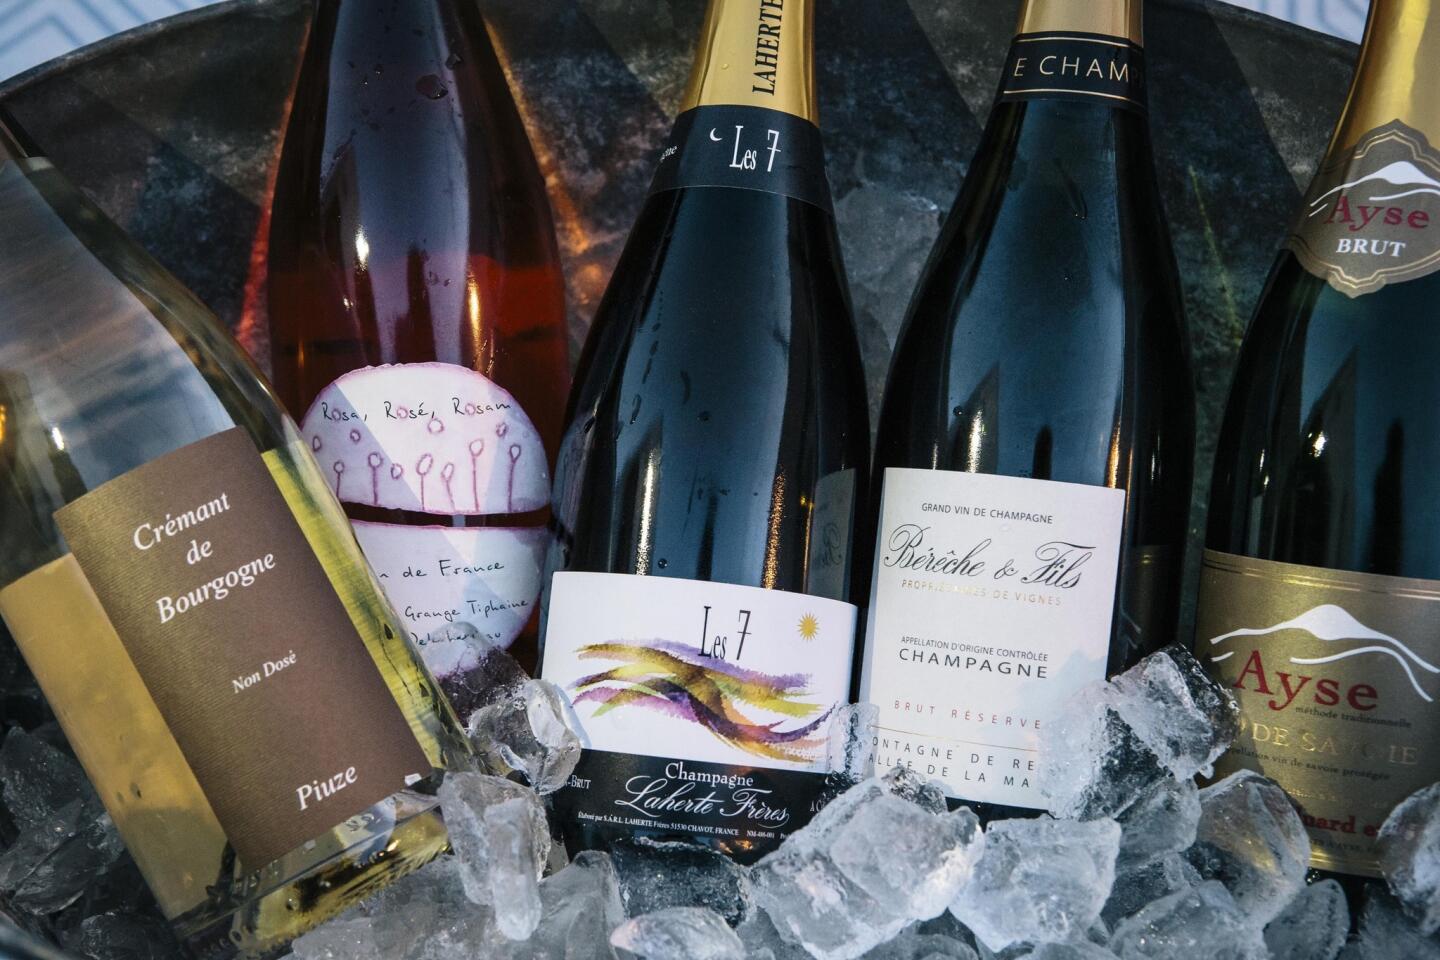 Jill Bernheimer, owner of the wine and spirits store Domaine LA, rolls out her favorites - Champagnes, Crémants de Bourgogne and more - for her annual autumn bash.